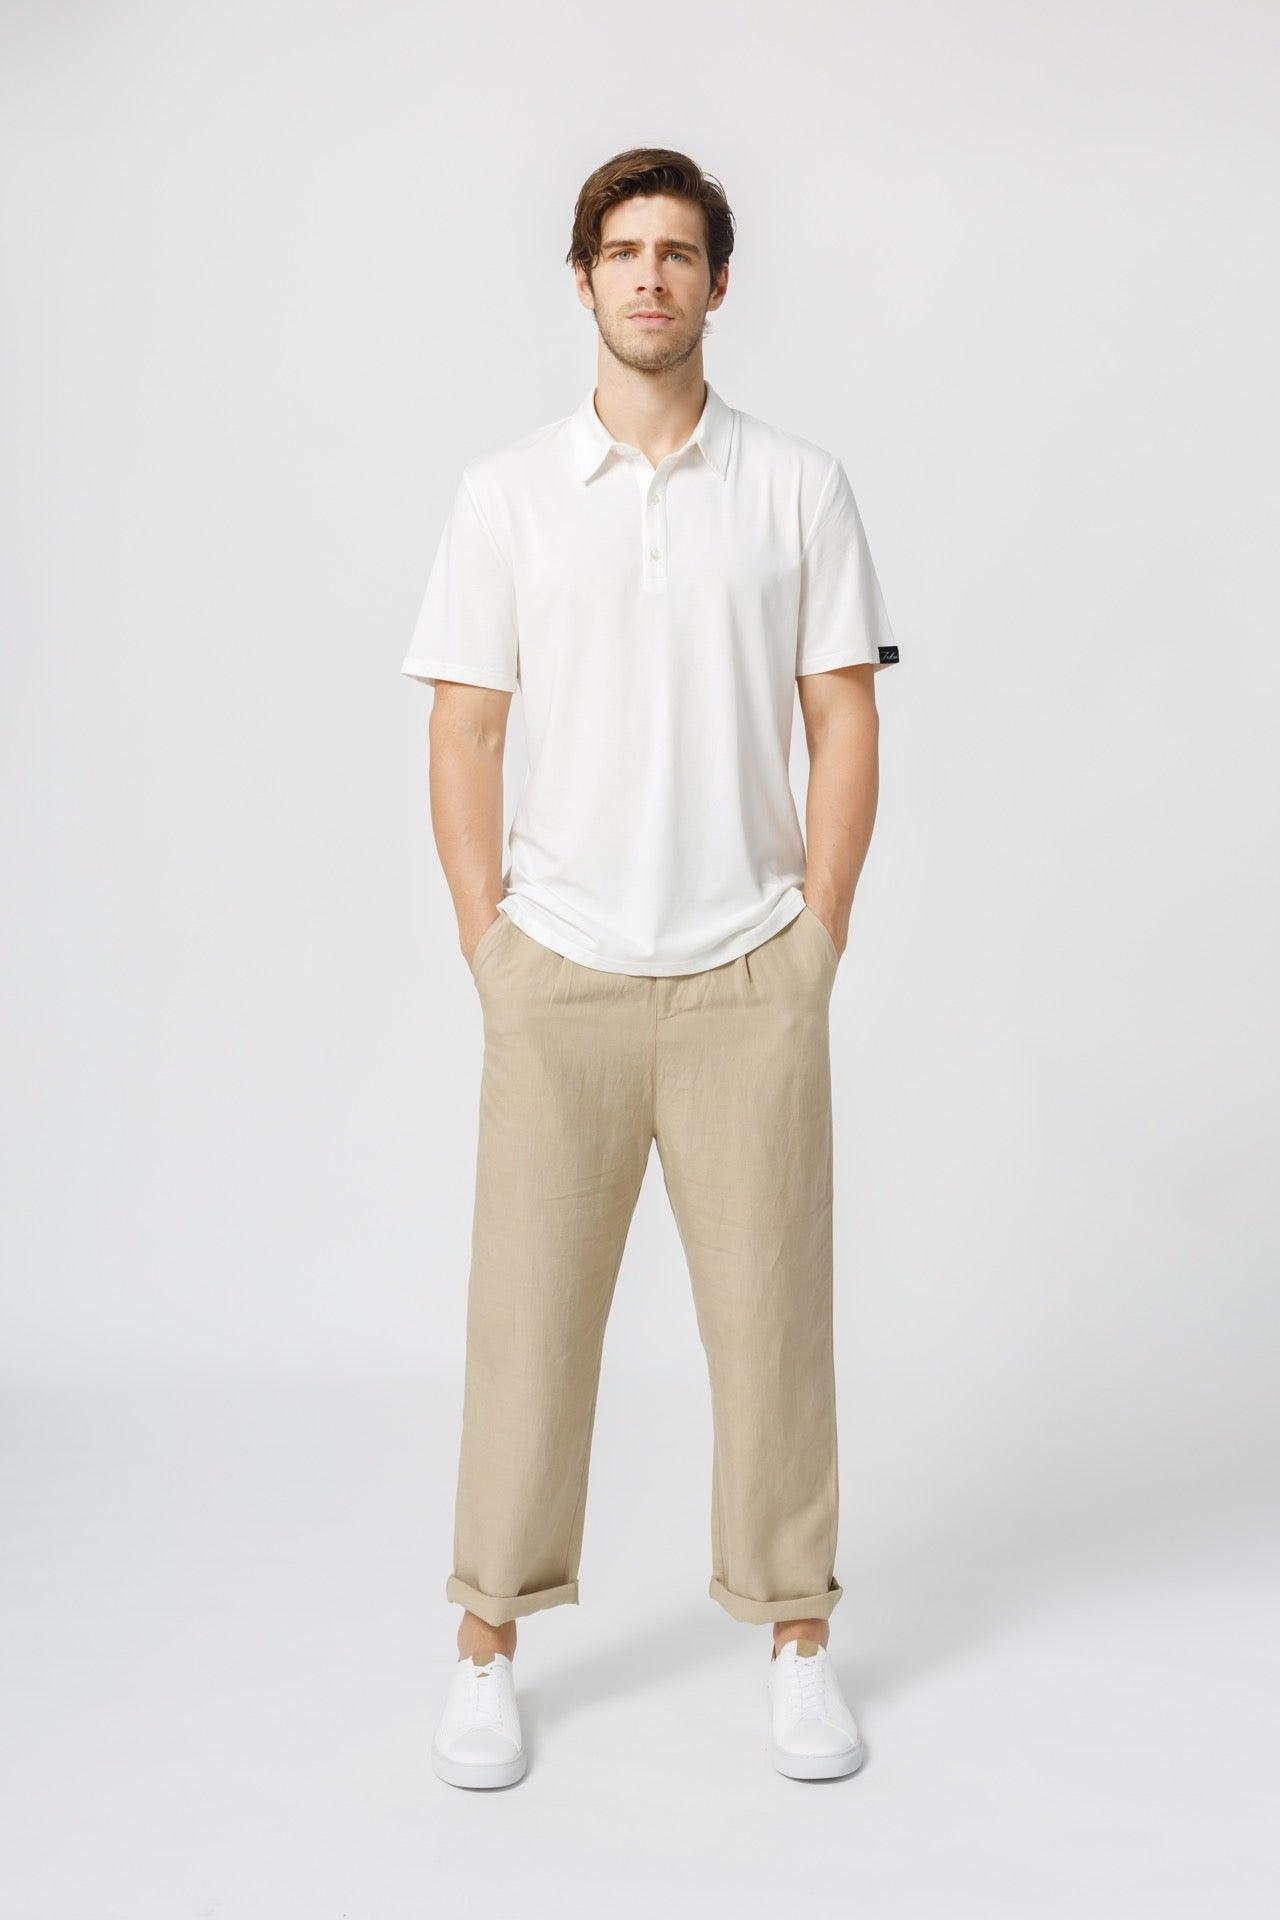 Men&#39;s Sustainable Polo Shirt - NOT LABELED